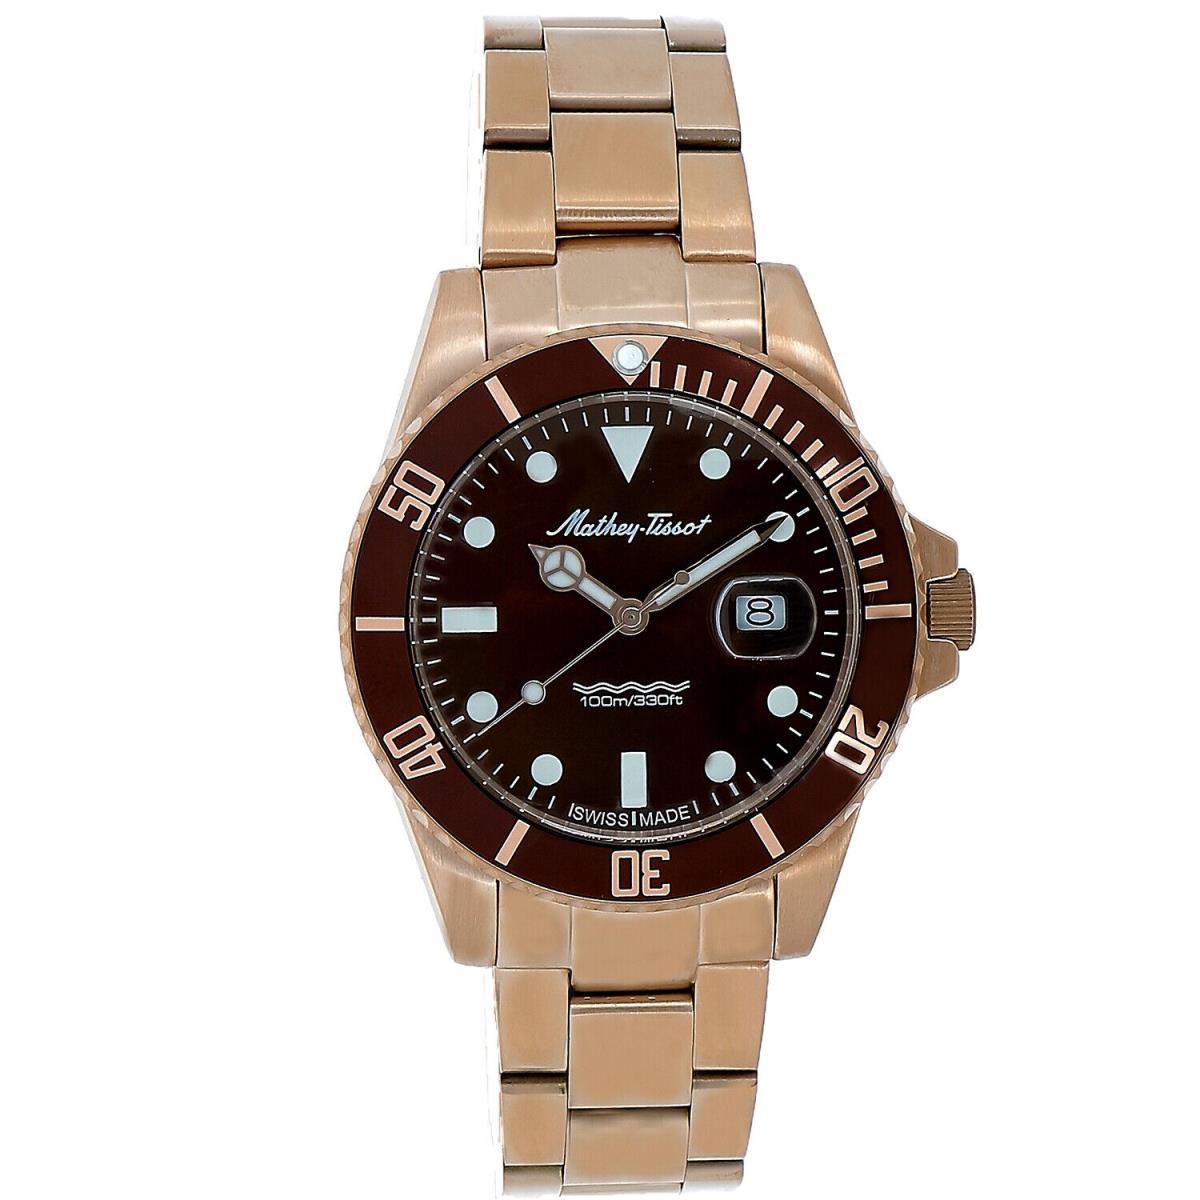 Mathey Tissot Men`s Classic Brown Dial Watch - H908APRM - Dial: Brown, Band: Rose gold